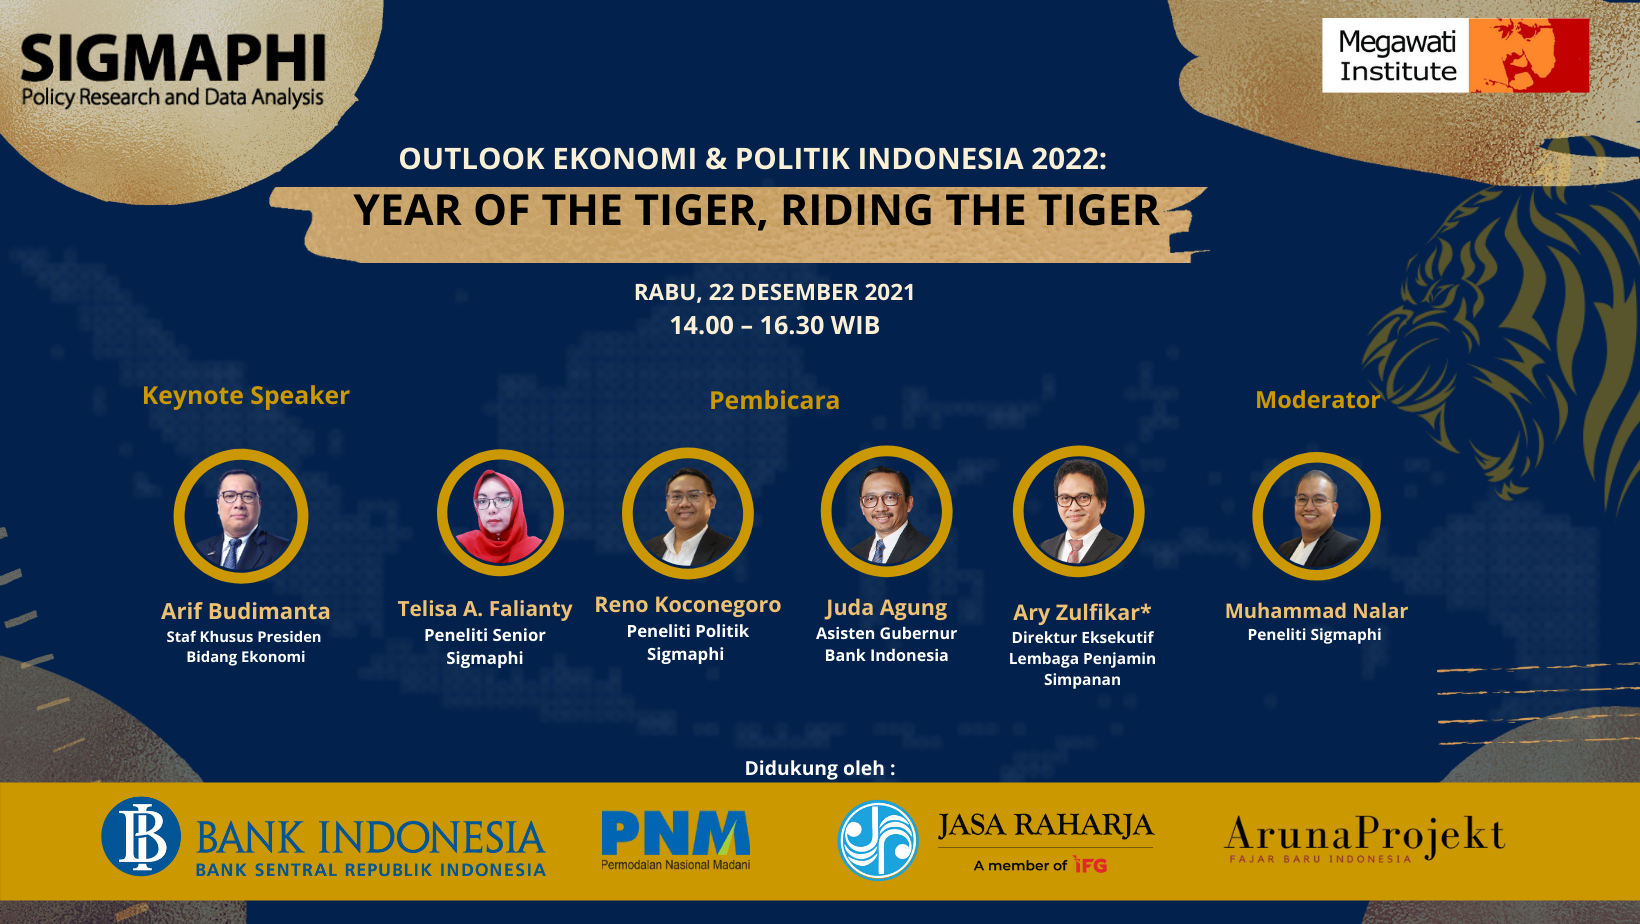 OUTLOOK EKONOMI & POLITIK INDONESIA 2022 :YEAR OF THE TIGER, RIDING THE TIGER